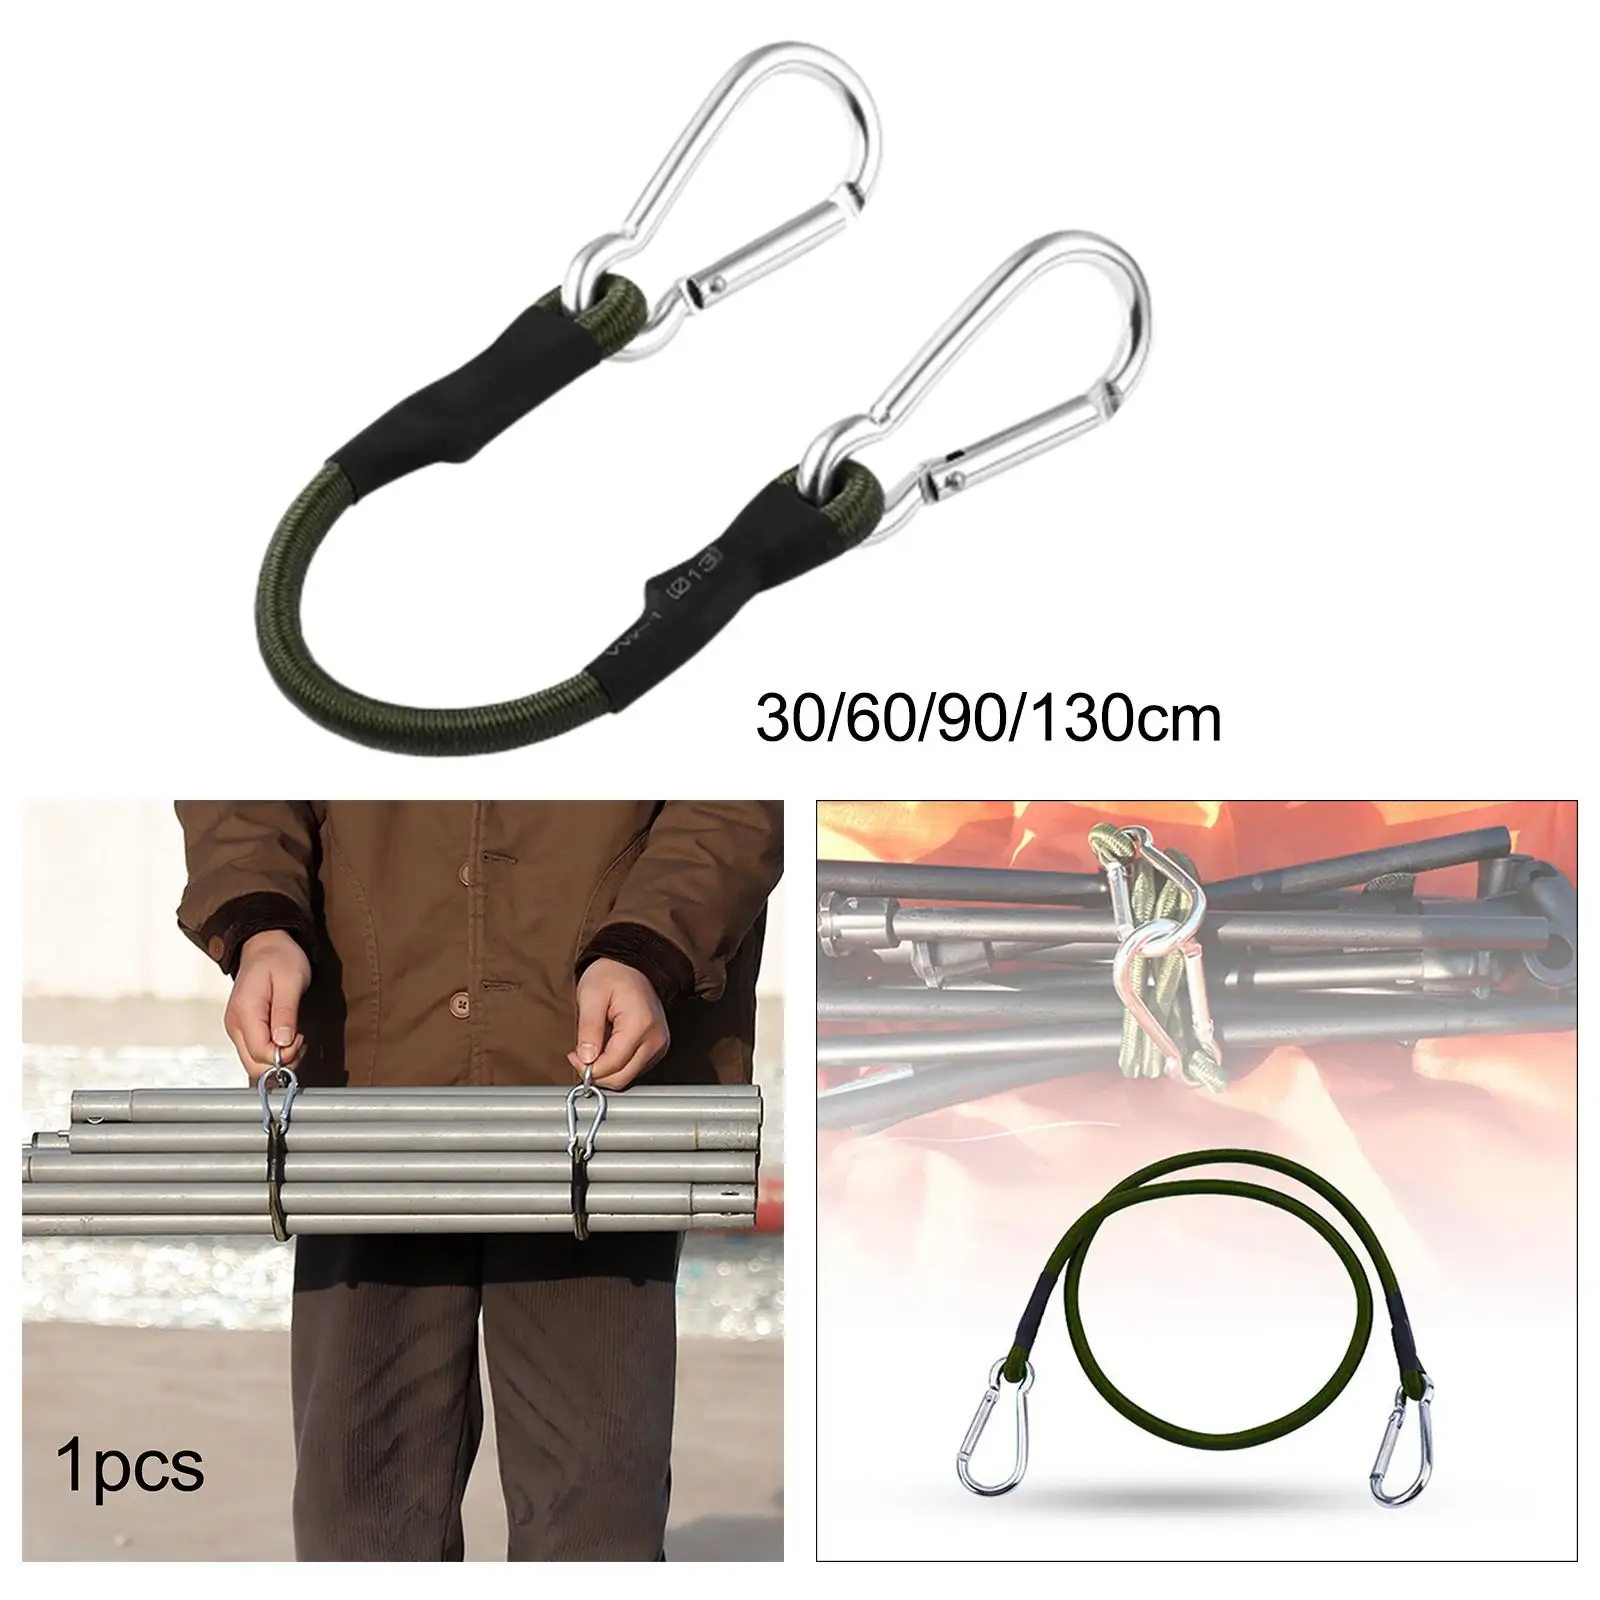 Bungee Cords with Carabiner Strong Cable for Motorcycle Caravans Outdoor Tent